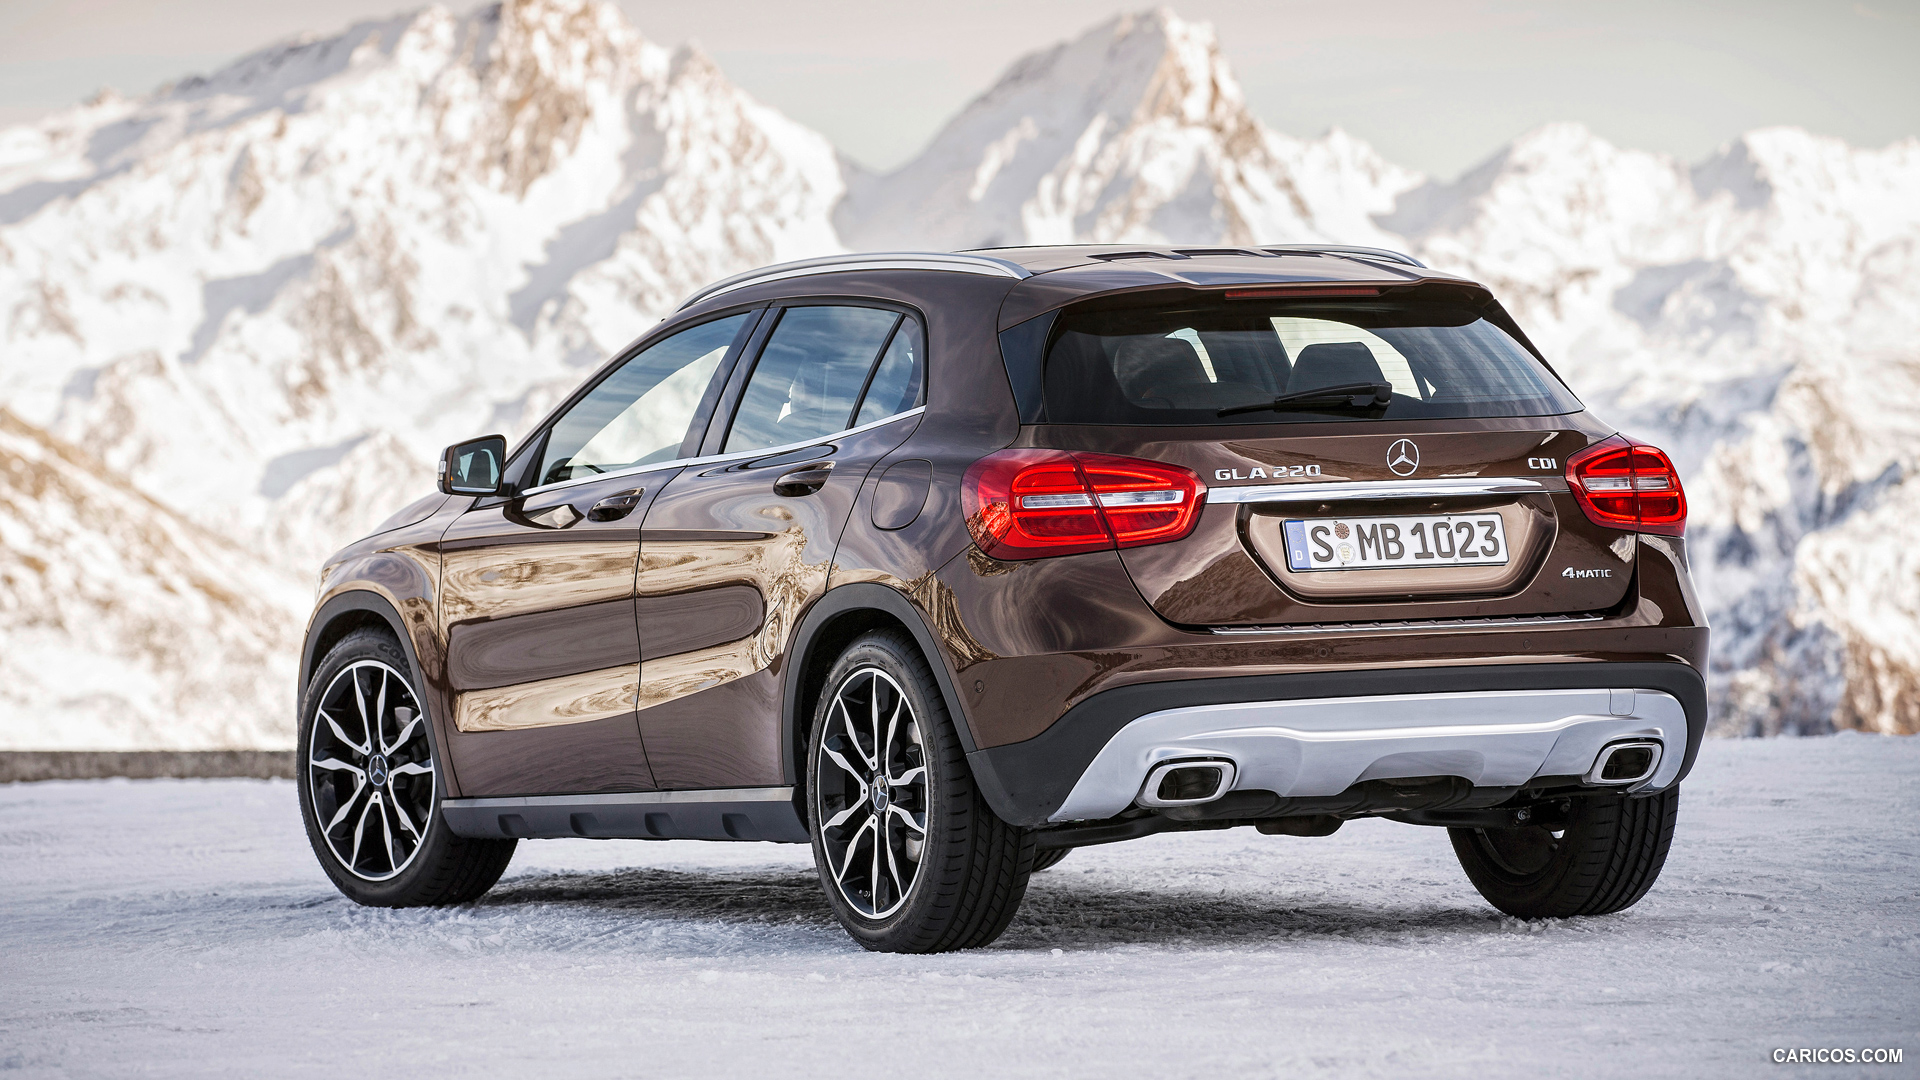 2015 Mercedes-Benz GLA 220 CDI 4MATIC - In Snow - Rear, #69 of 71